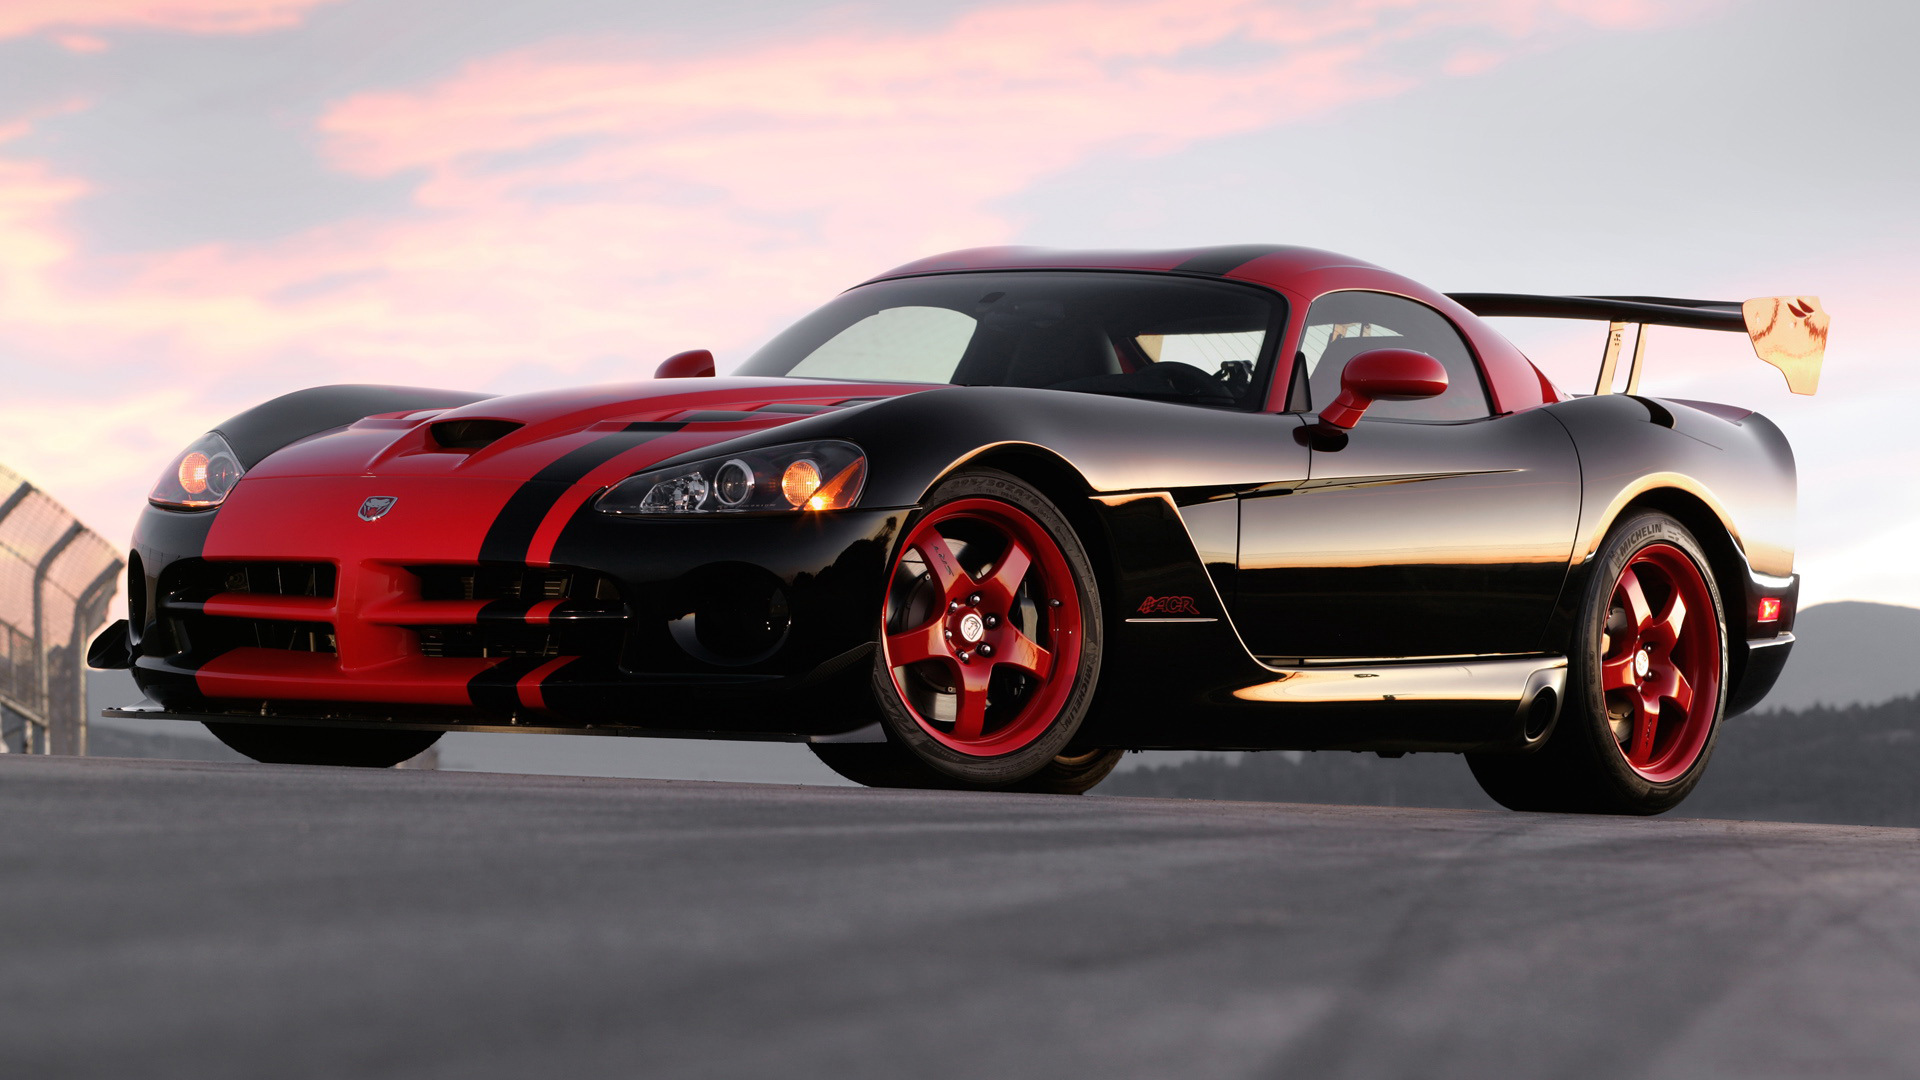 Wallpapers Of The Day: Dodge Viper | 1280x720px Dodge Viper Photos